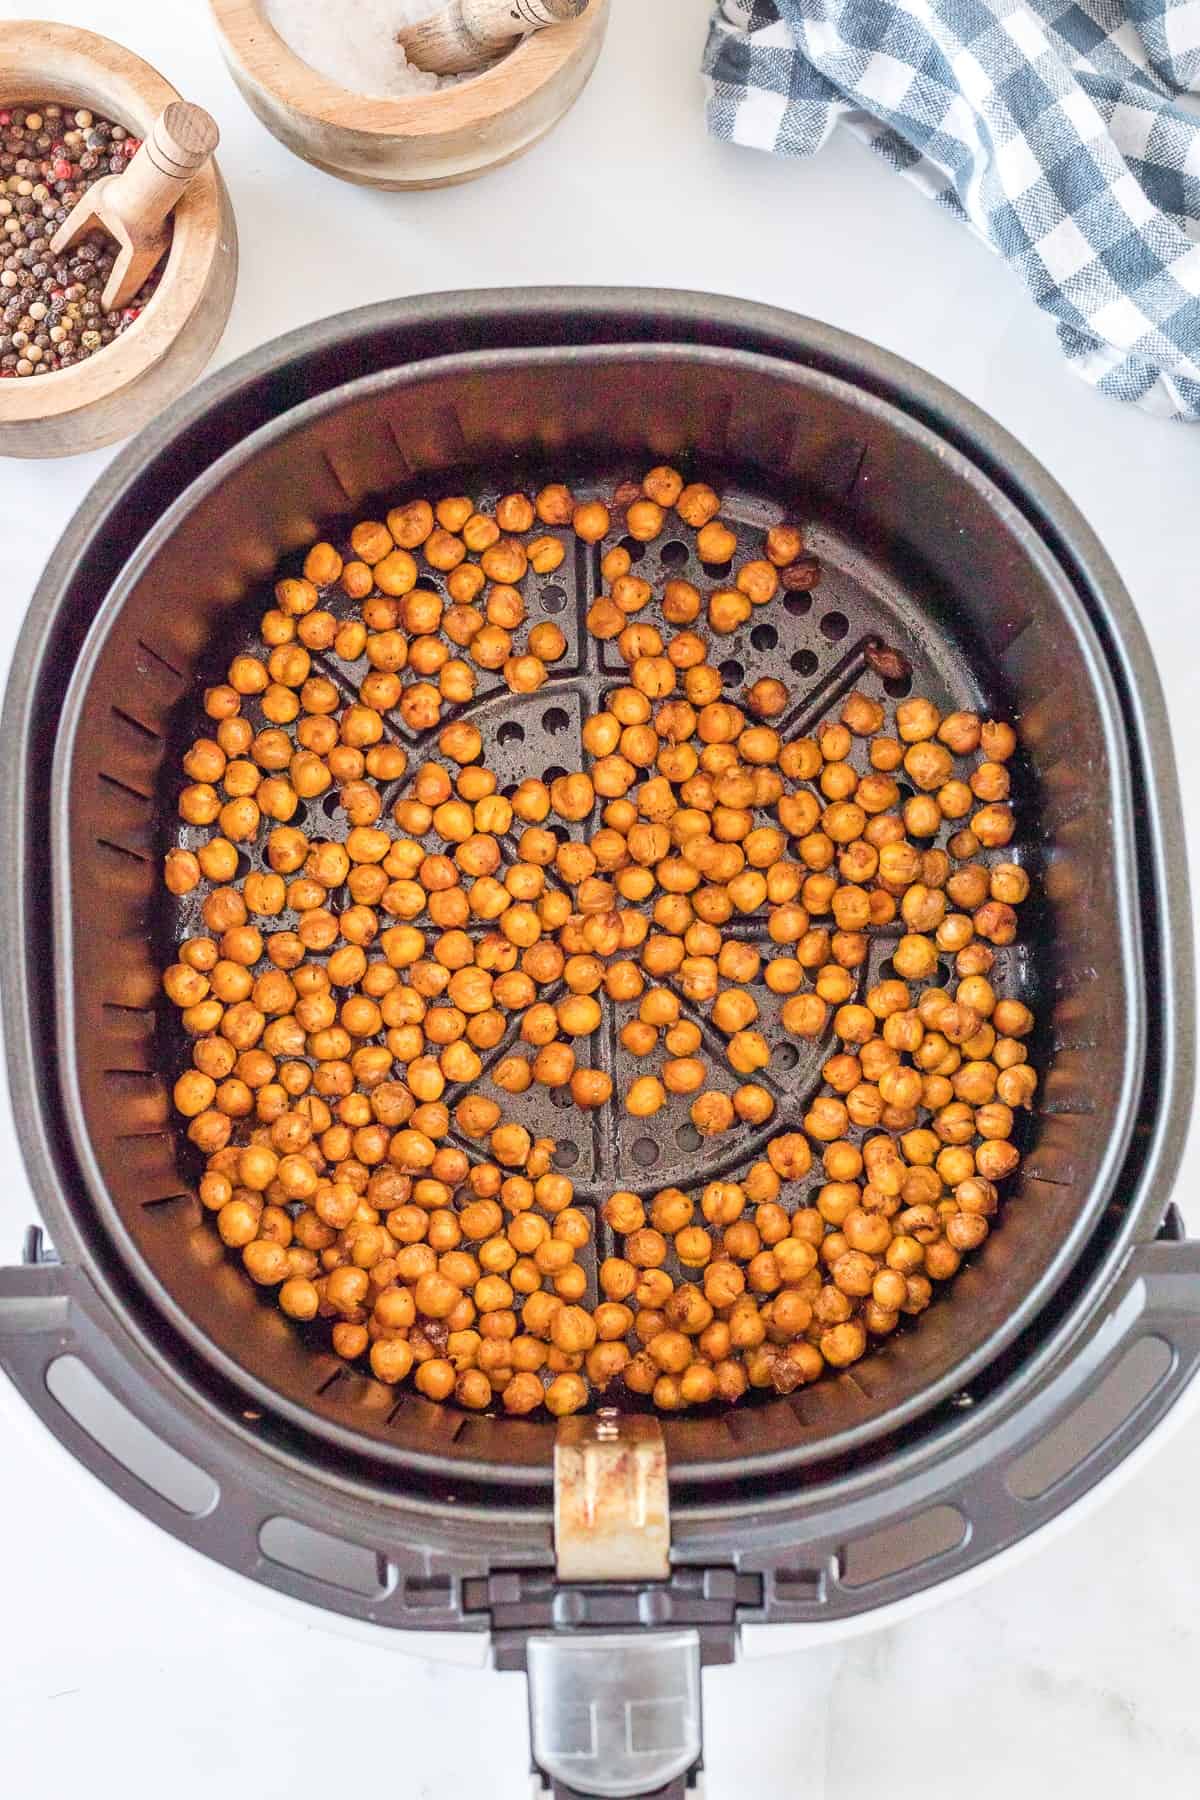 cooked chickpeas in the basket on the air fryer.